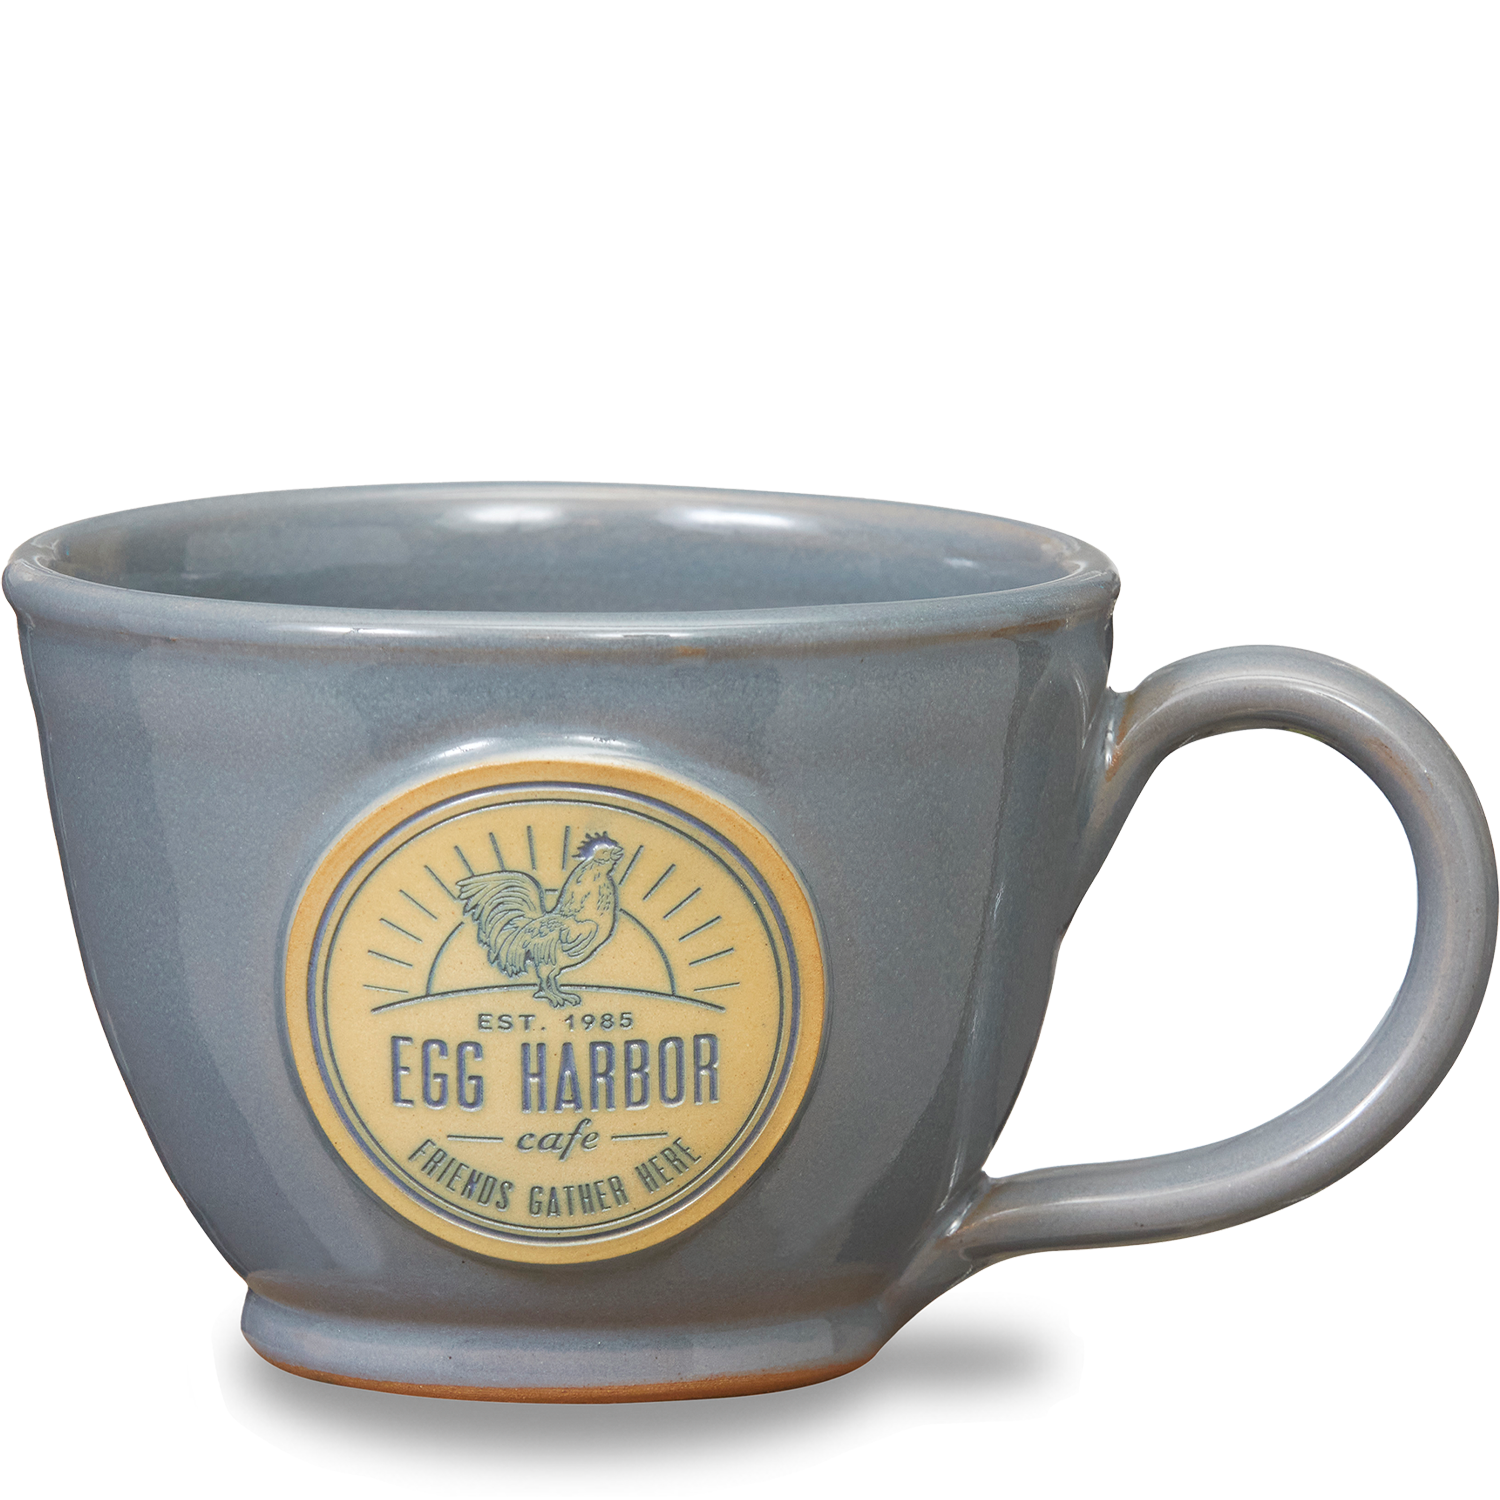 Egg Harbor Cafe <a class='qbutton' href='https://deneenpottery.com/mug-styles/french-latte/'>View More Details</a>